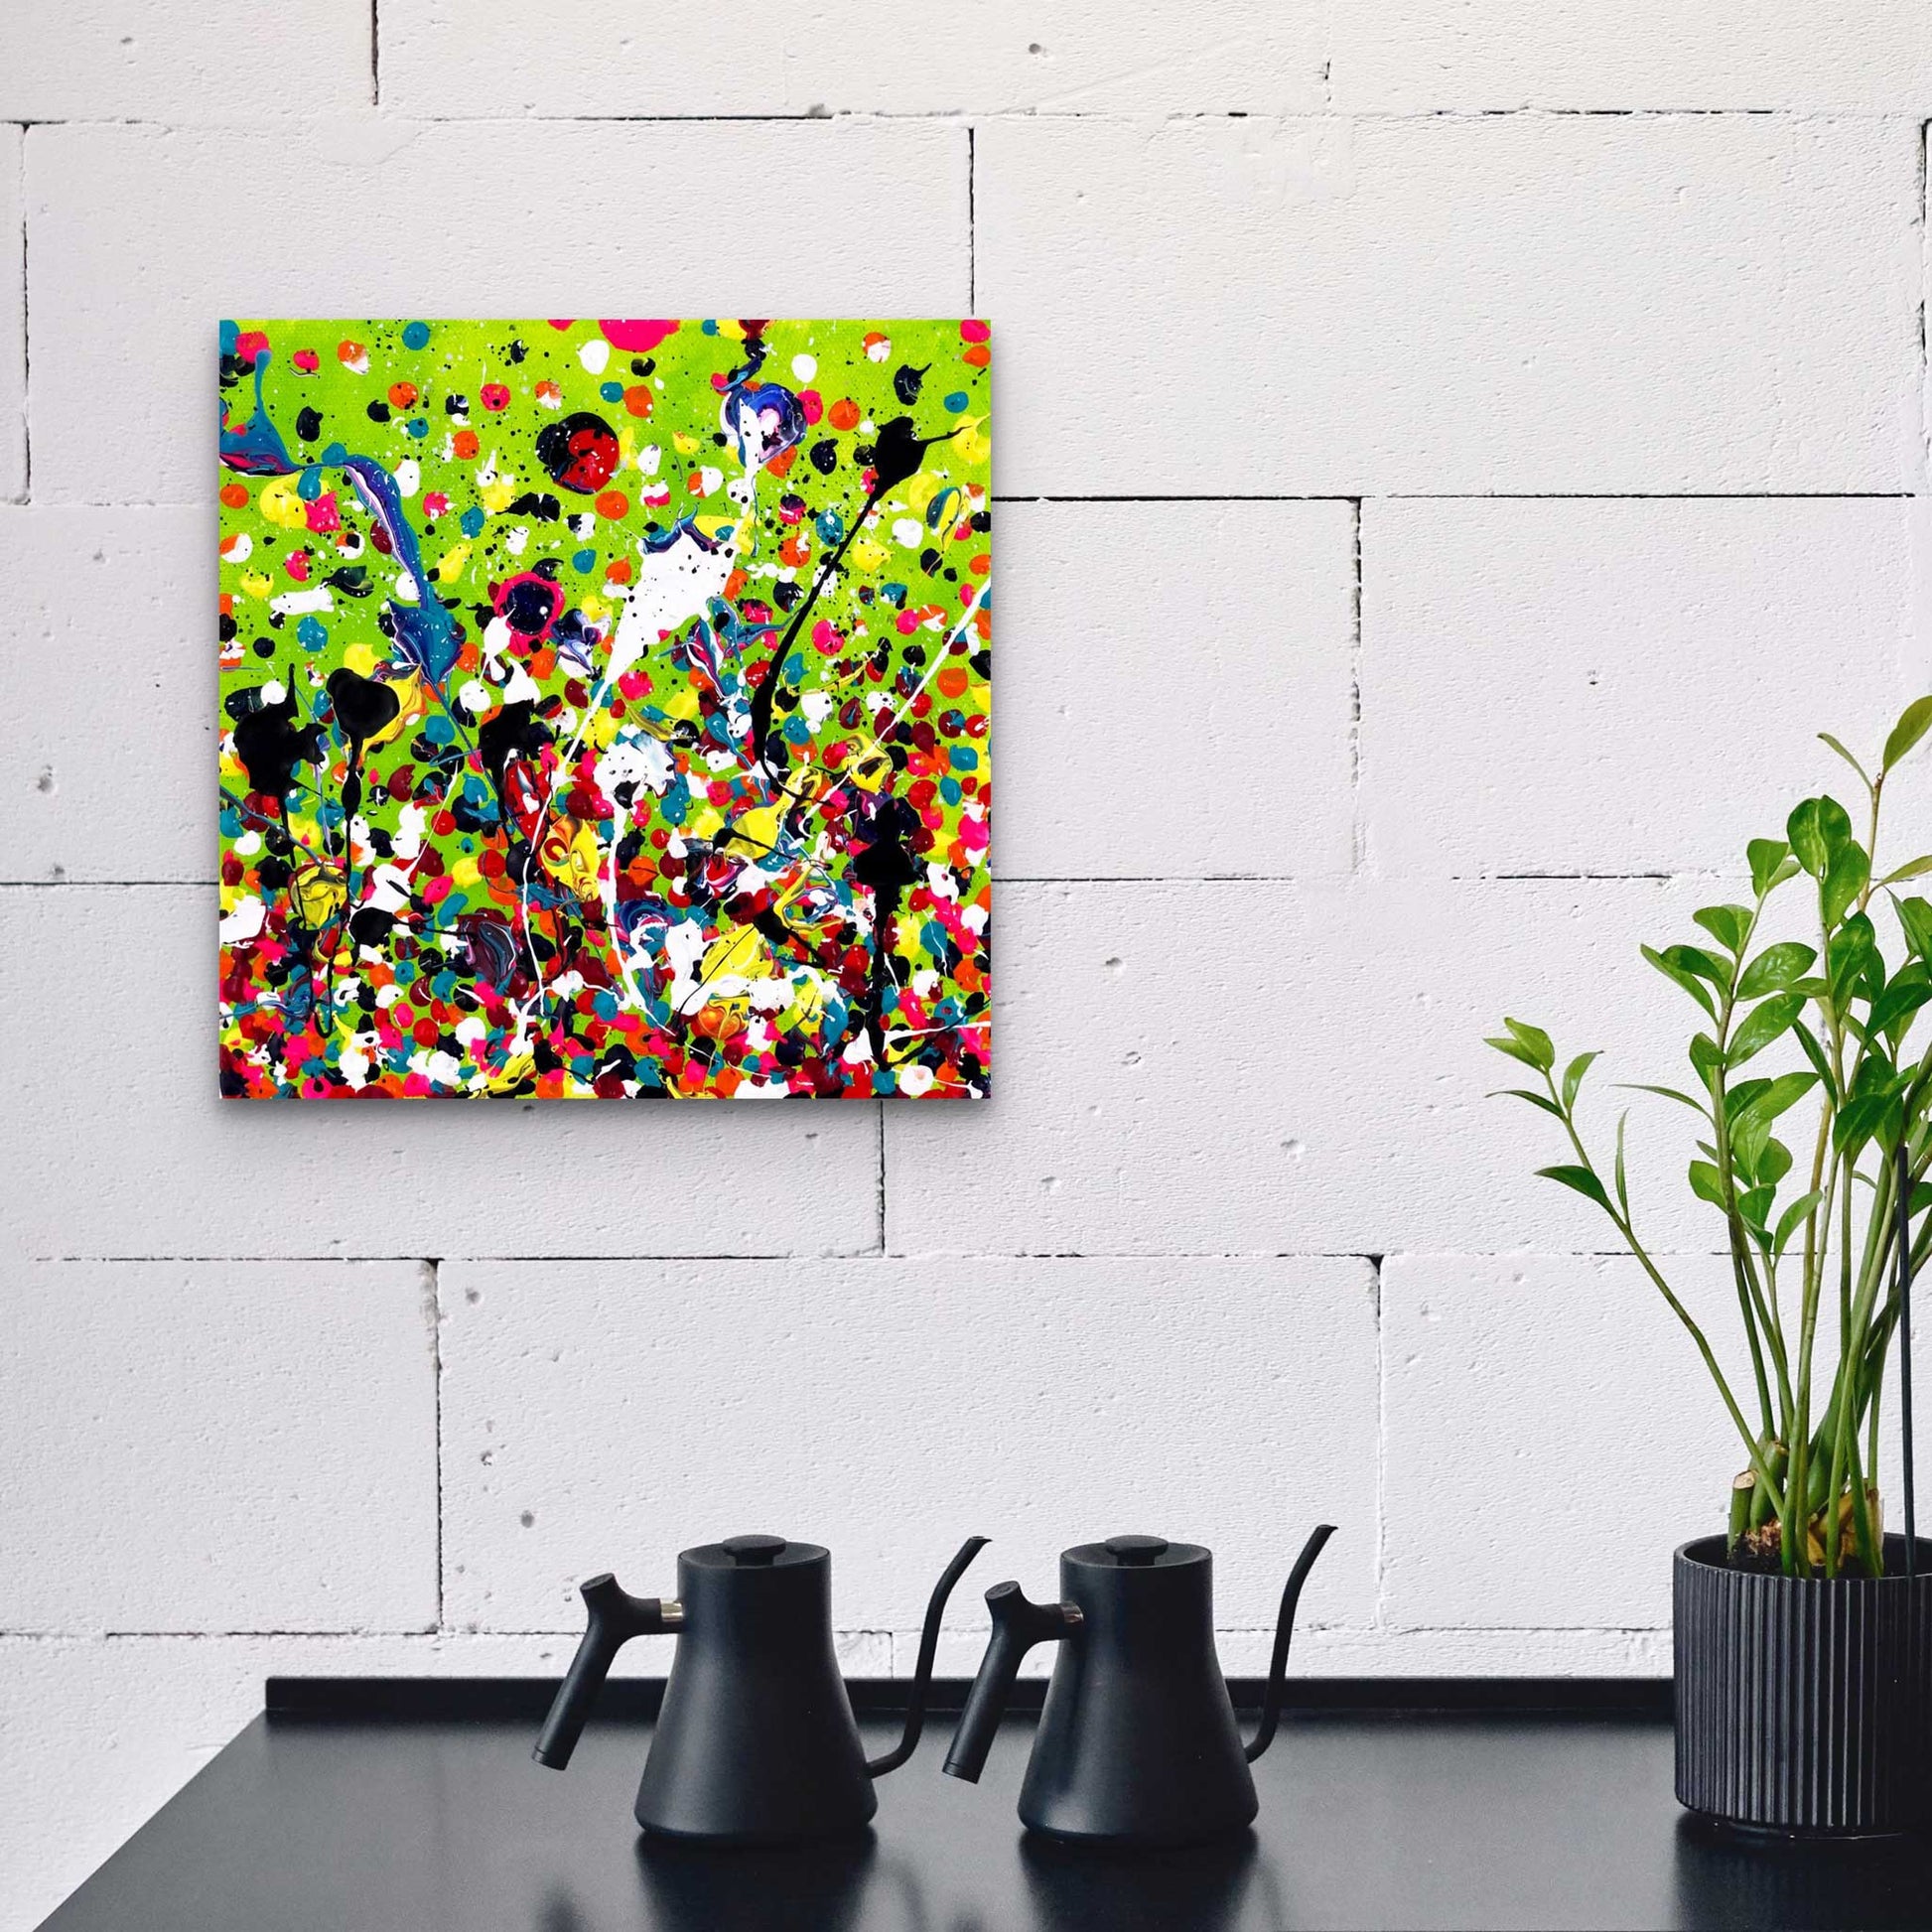 Image of 'The Green Room' original abstract canvas art seen hanging in a kitchen space. Explore more of Bridget Bradley's art